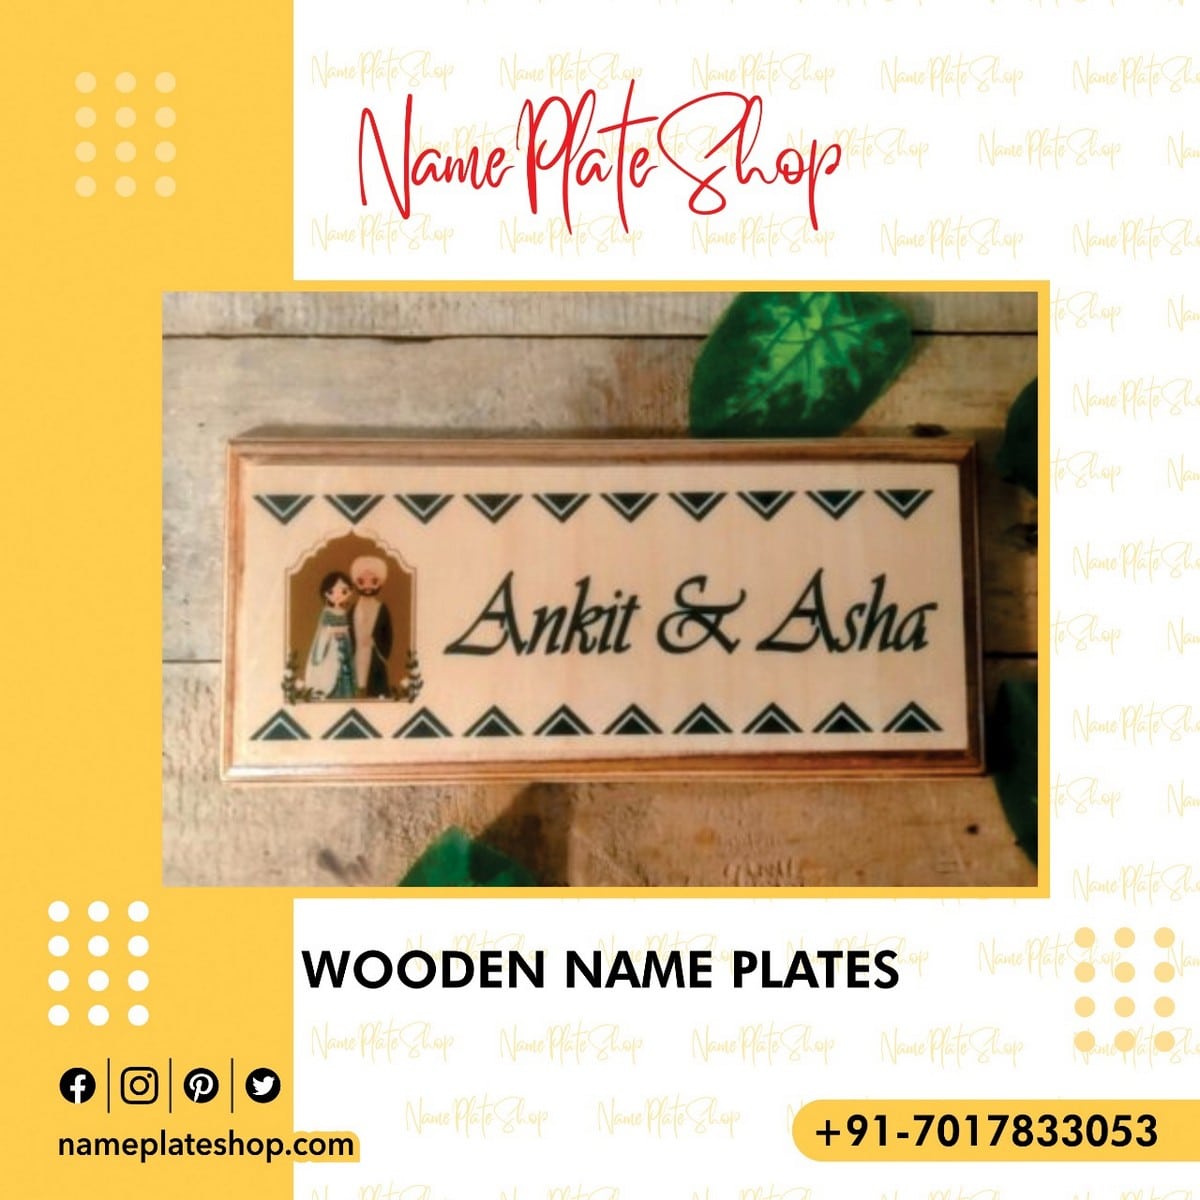 Wooden Name Plates From Nameplateshop